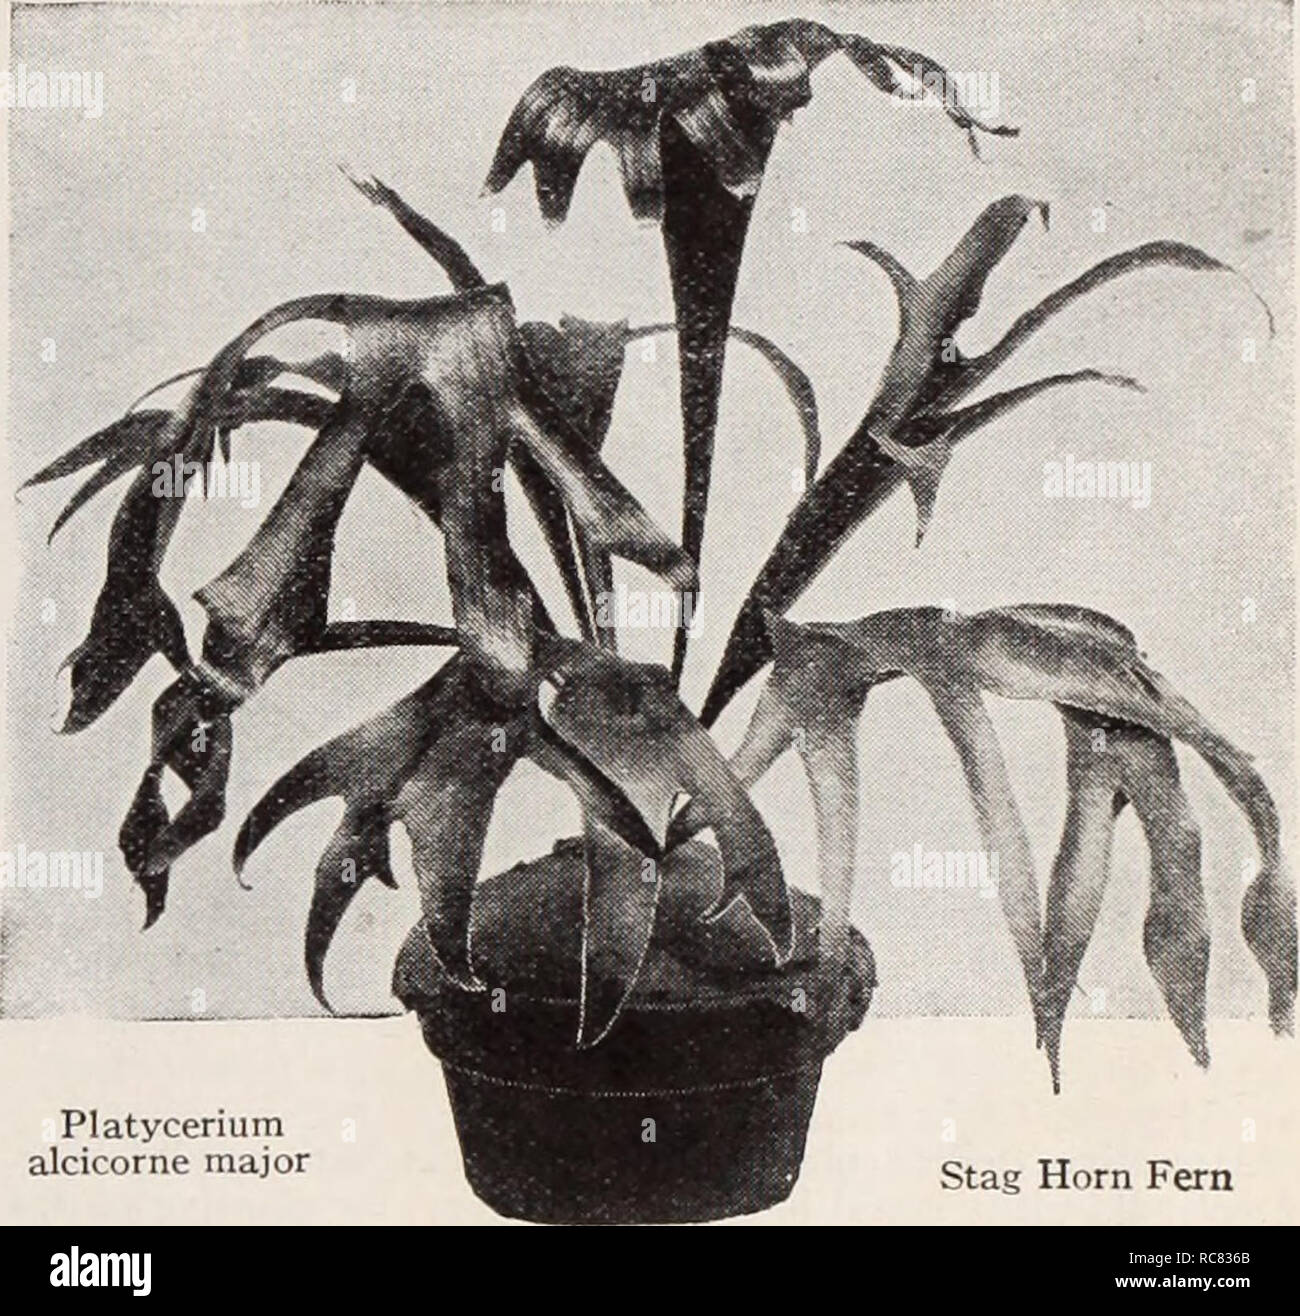 . Dreer's garden book / Henry A. Dreer.. Nursery Catalogue. Asplenium Nidus Avis Asplenium Nidus Avis (Bird's Nest Fern). We have a splendid lot of these interesting house ferns. 2 inch pots, 50c; 3| inch pots, 75c; 5 inch pots, $1.50 each. Cibotium Schiedei (Mexican Tree Fern). One of the most desirable and most valuable of all Ferns for room decoration. Beautiful light green foliage. 4 inch pots, $1.00; 6 inch pots, $2.50; 8 inch tubs, $5.00; 10 inch tubs, $7.50 each. Cyrtomium Rochfordianum com- pactum (Crested Holly Fern). Next to the Boston Ferns the Holly Fern is the most satisfactory f Stock Photo